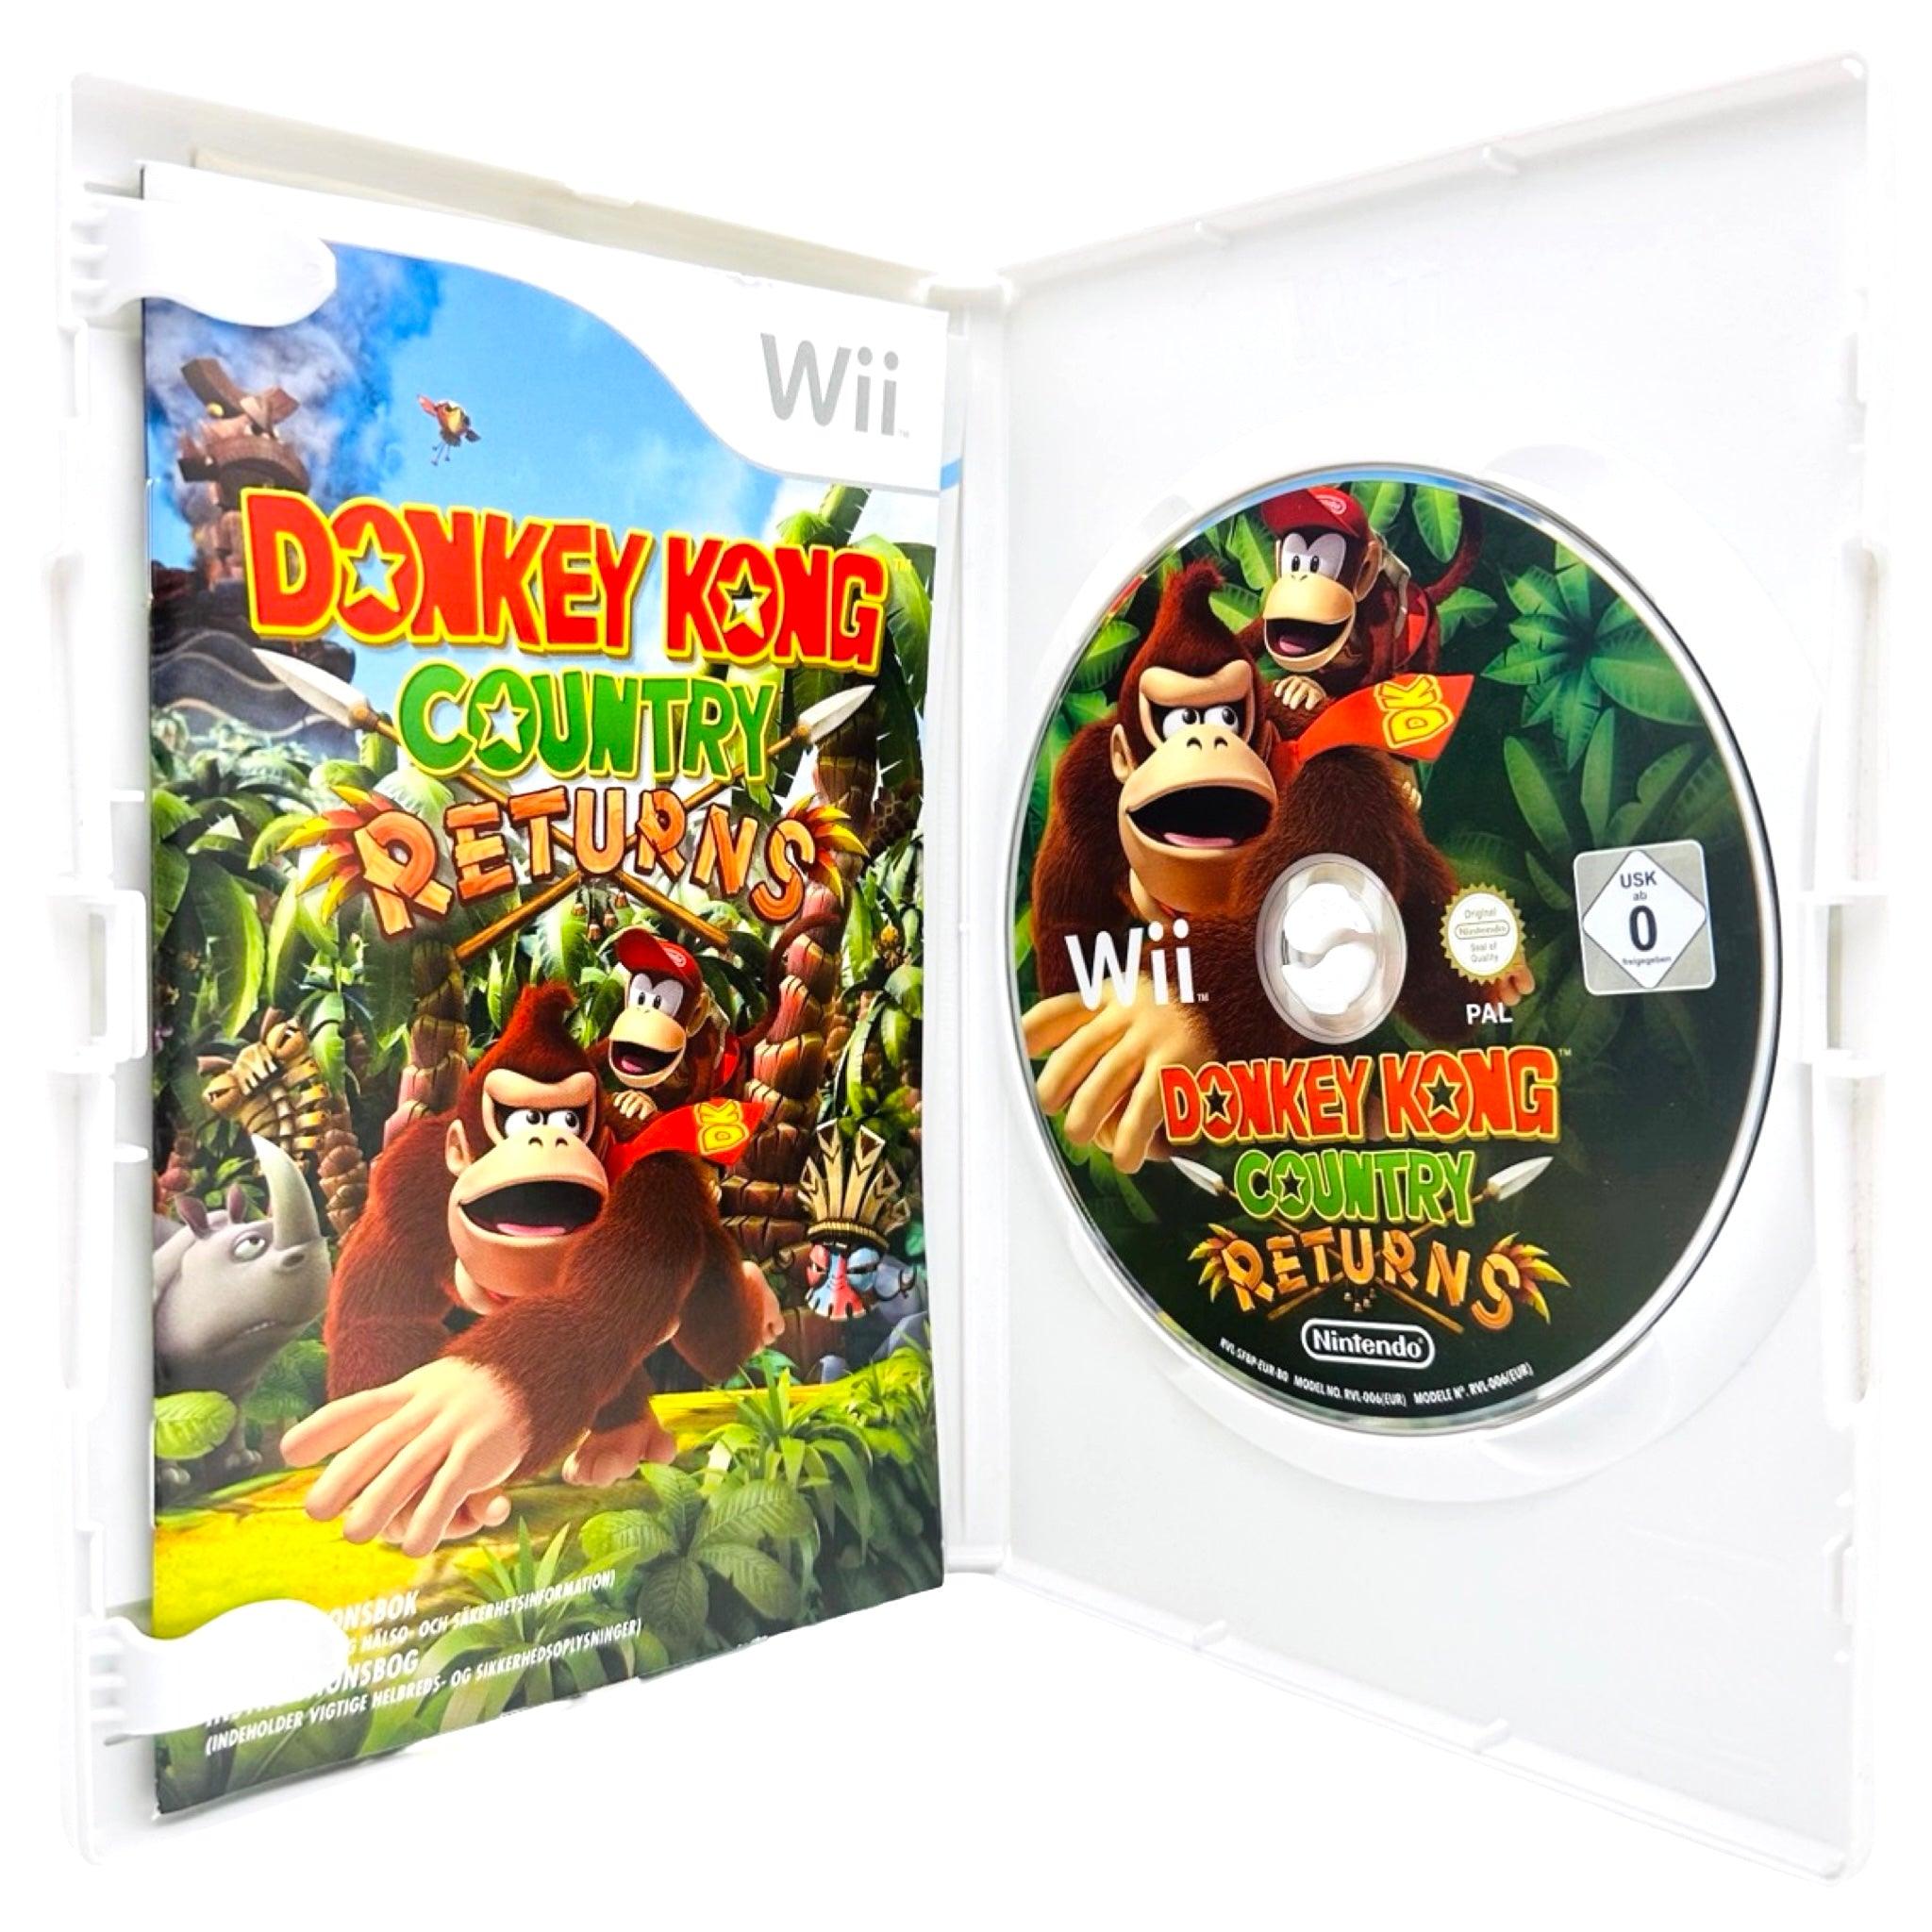 Wii: Donkey Kong Country Returns - RetroGaming.no